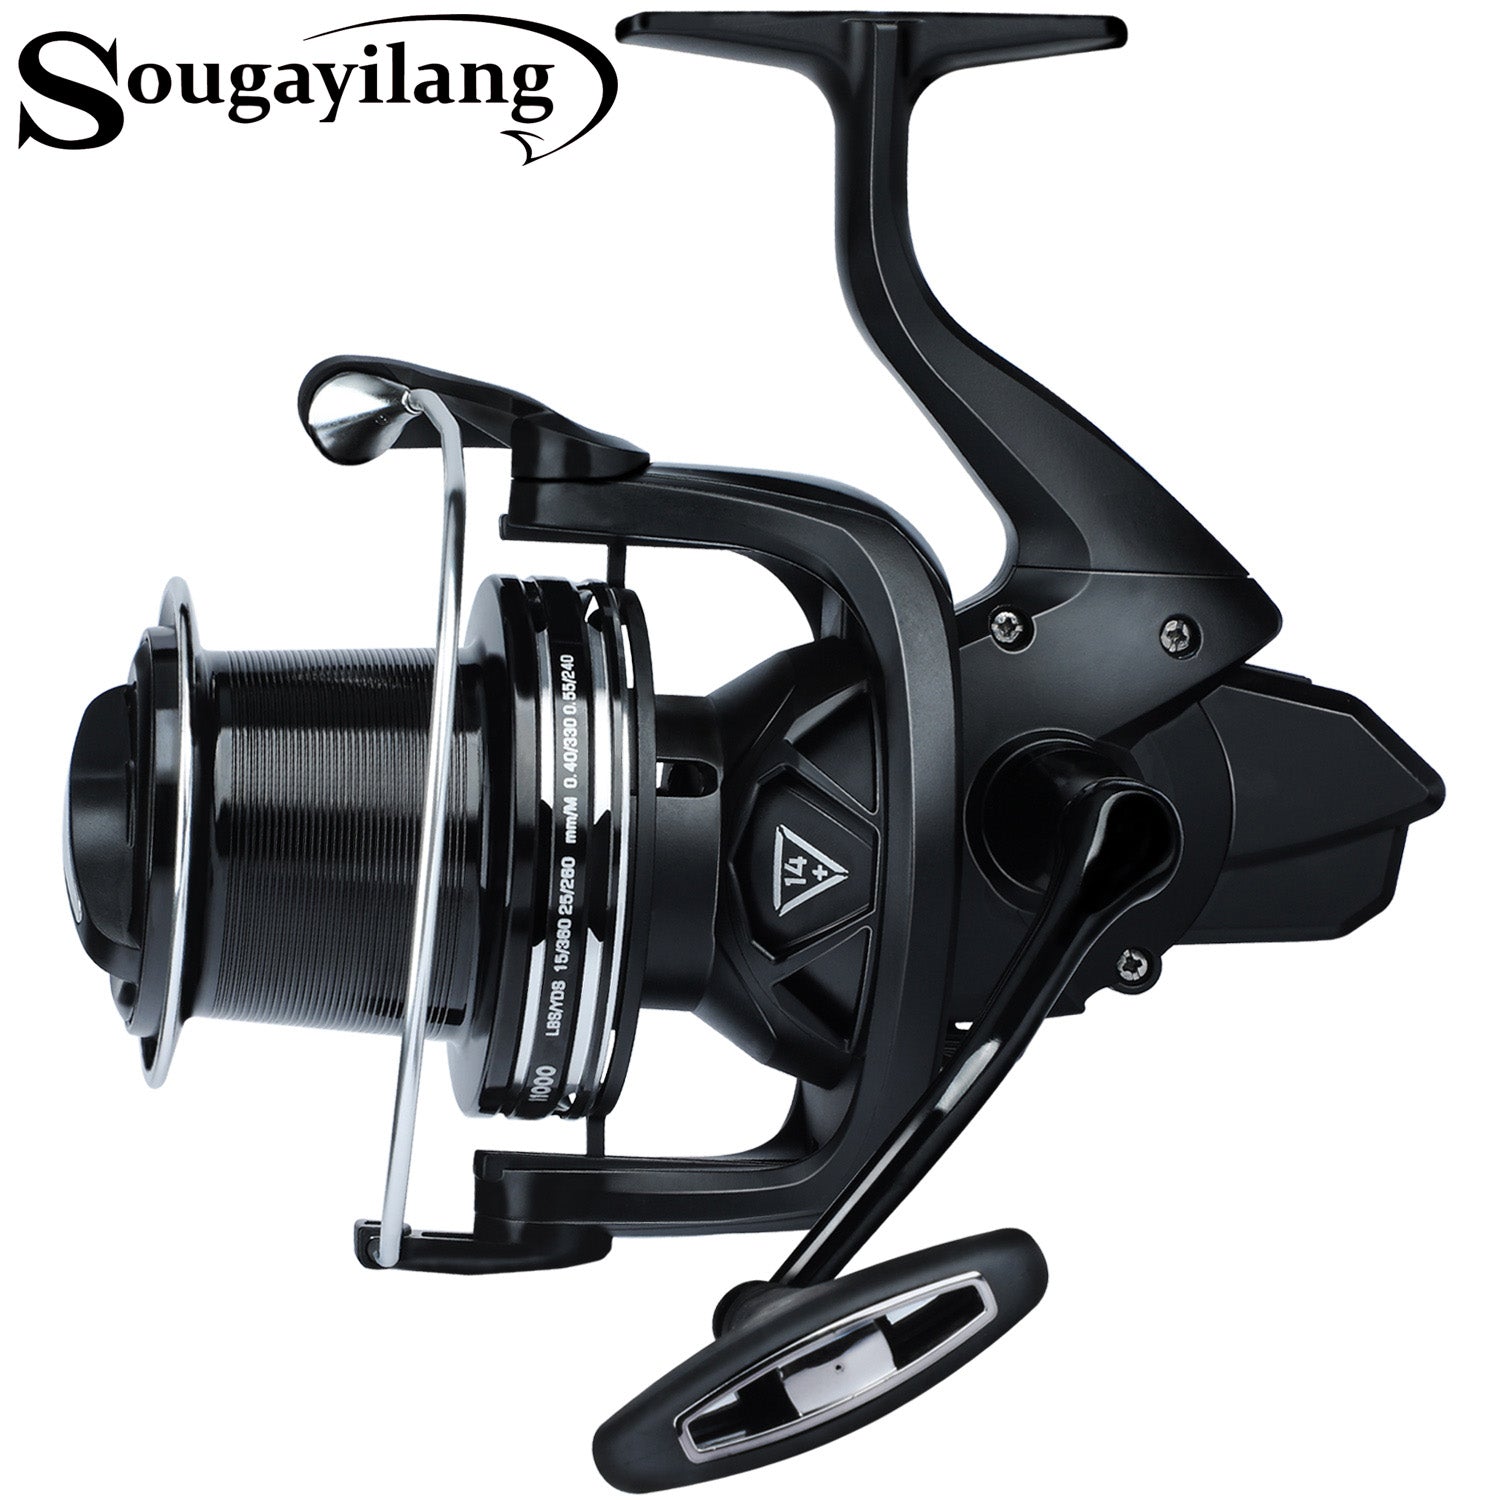 Fishdrops Surf Spinning Reel, Size 10000 12000 Saltwater Fishing Reels, Full Metal Frame 31 lbs Max Drag, 10+1 Stainless Bb Ultra Smooth Powerful